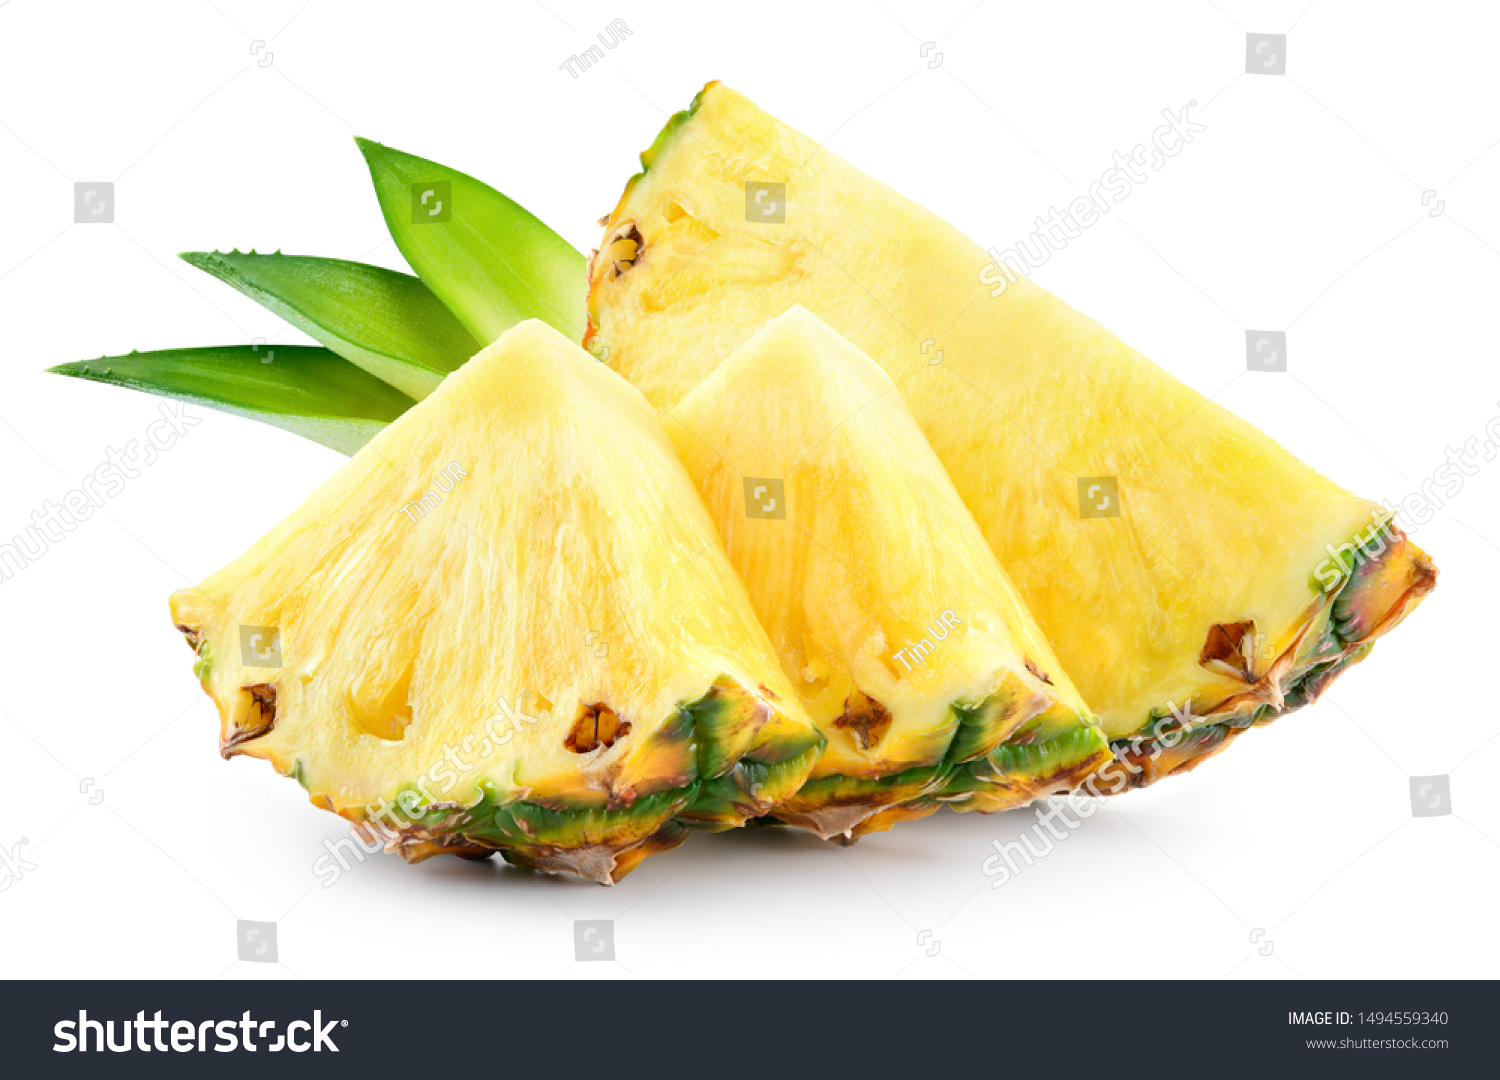 Pineapple slices with leaves. Pineapple isolate. Cut pineapple on white. #1494559340